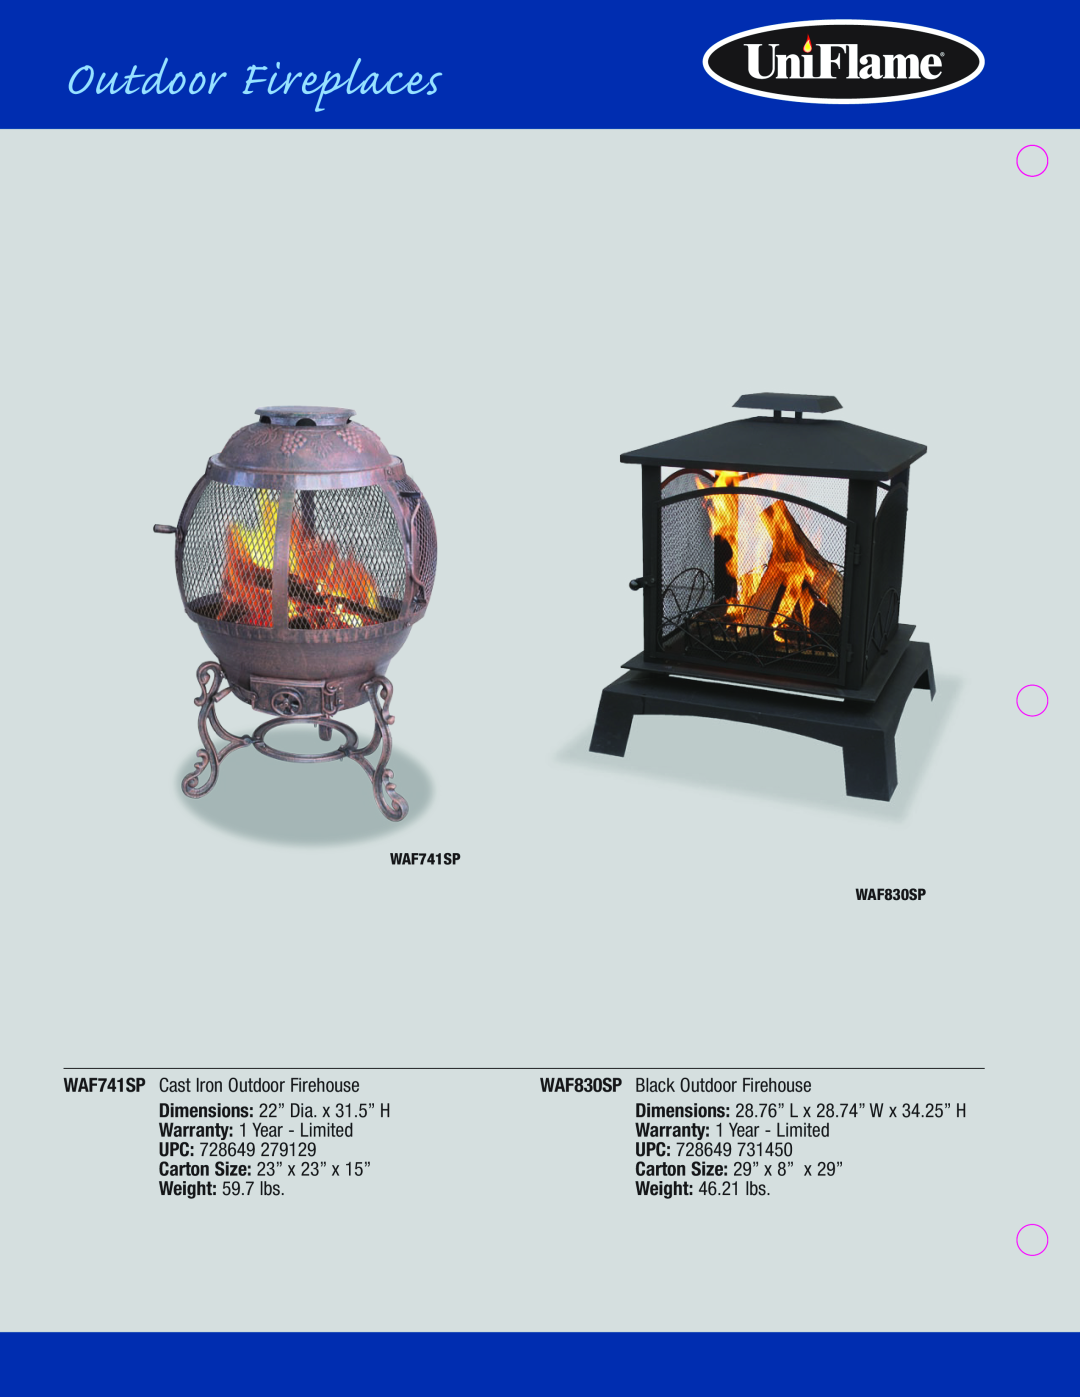 Blue Rhino Outdoor Lighting manual Outdoor Fireplaces, WAF741SP Cast Iron Outdoor Firehouse 